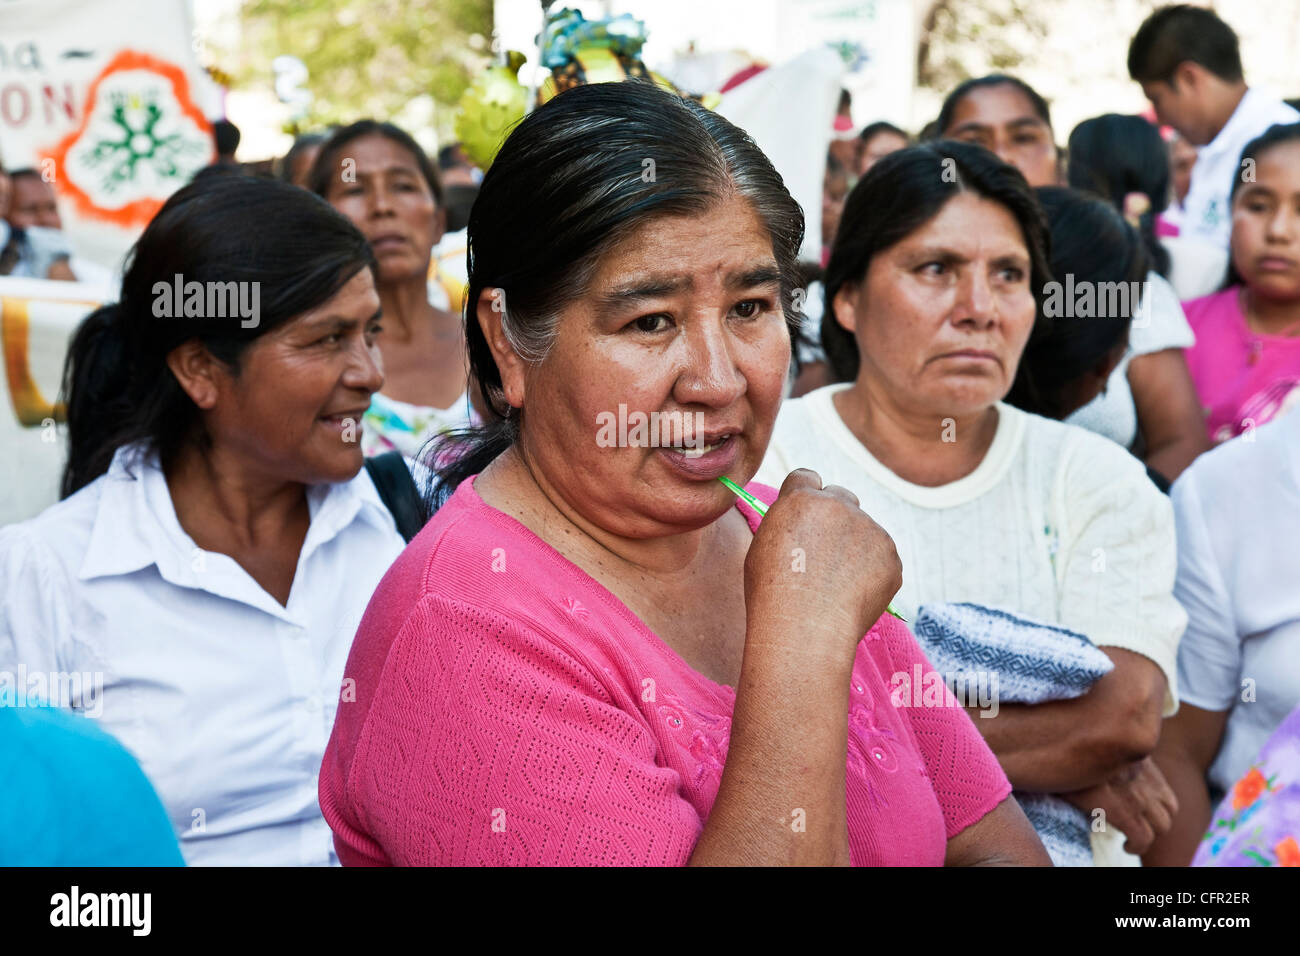 women who have benefited from microfinance loans for communities in Oaxaca gather to march on Bancomunidad 10th anniversary Stock Photo